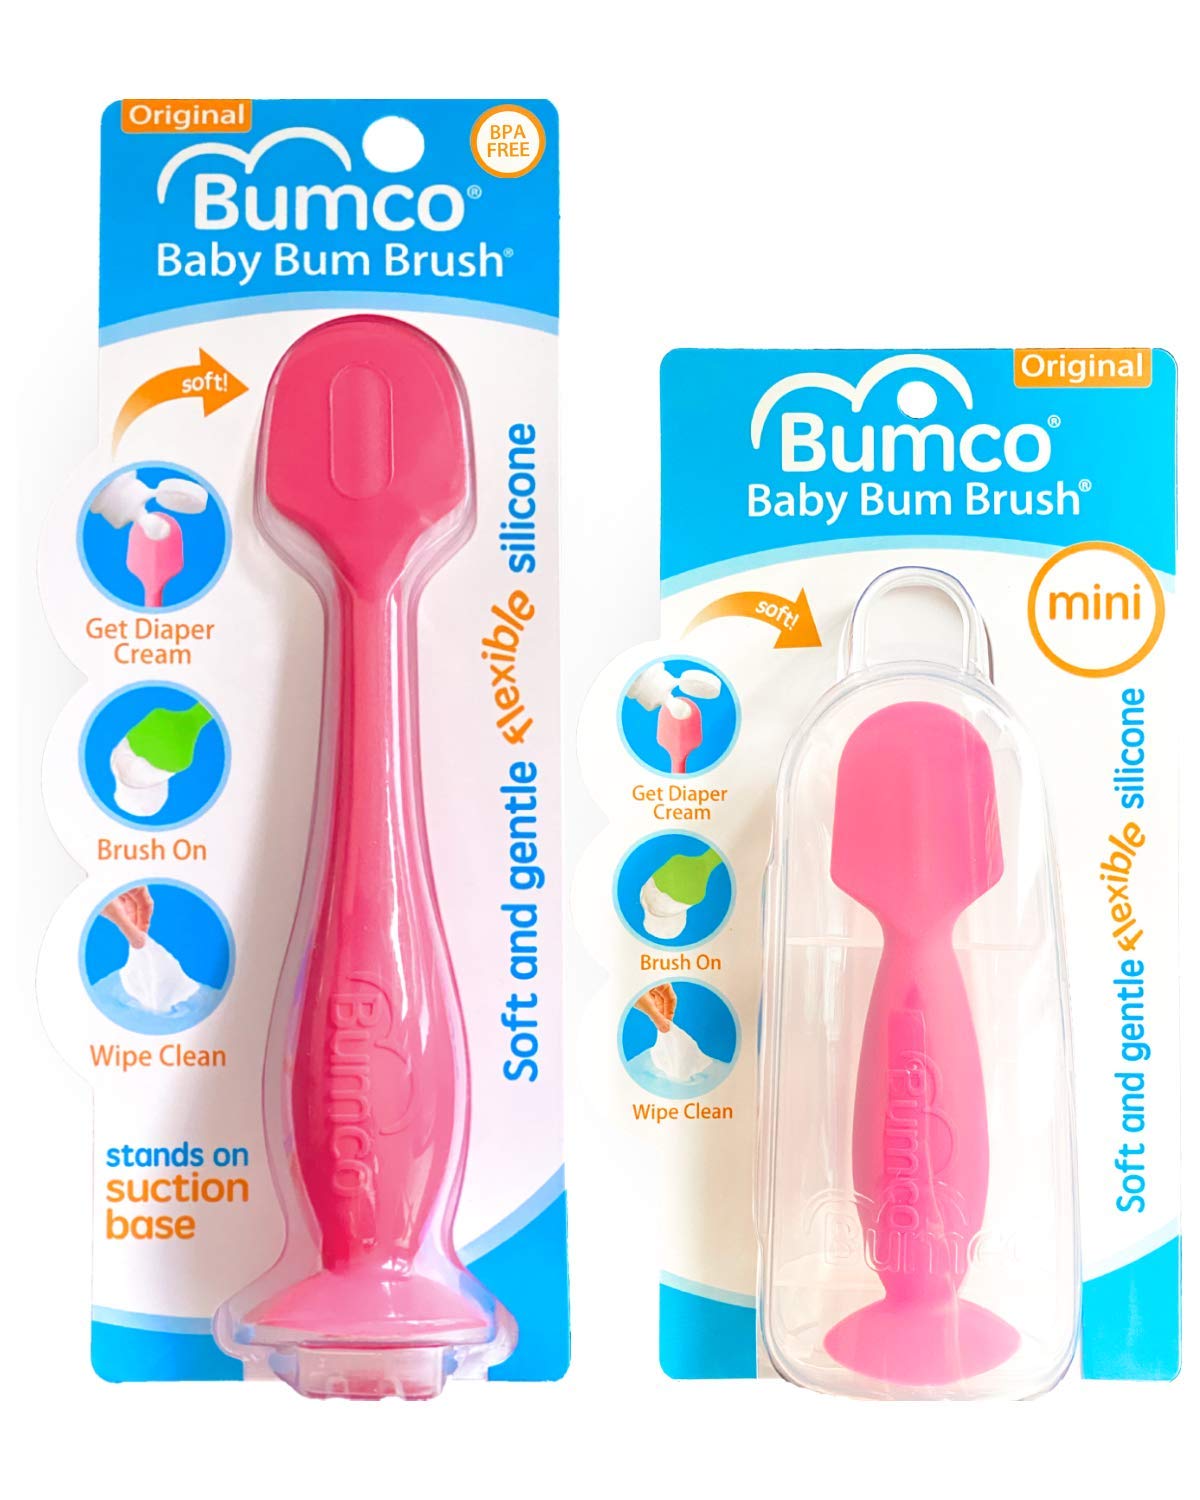 Book Cover Bumco 2-PACK Diaper Cream Spatula - FULL-SIZE + MINI Baby Bum Brush with TRAVEL CASE - Diaper Cream Applicator for Baby - Baby Necessities - Suitable for Aquaphor, Desitin - Pink Full-size + Mini Pink + Pink